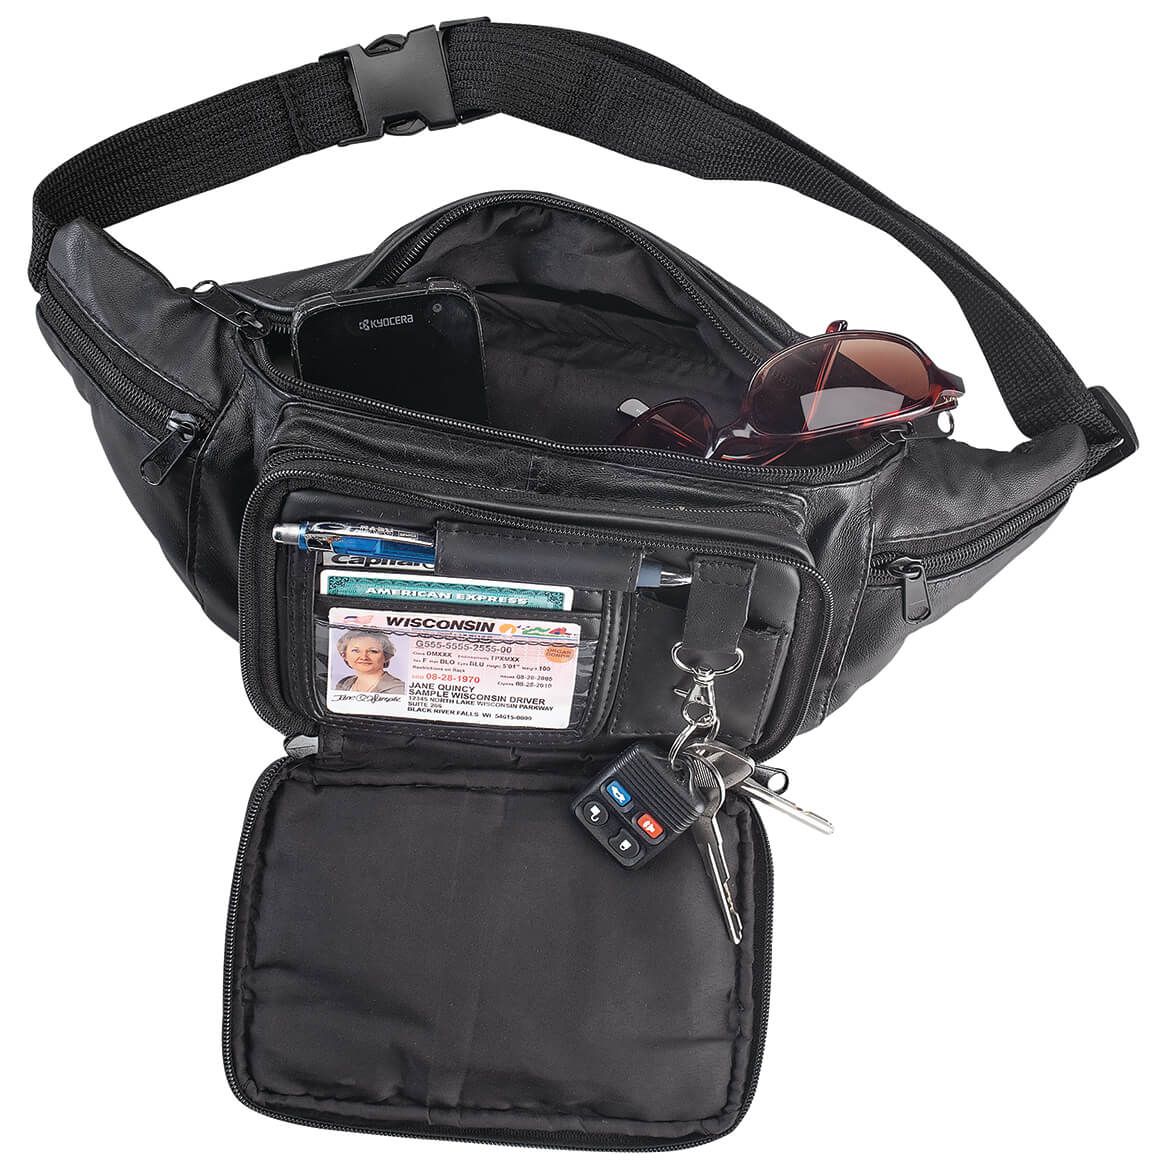 Leather Organizing Fanny Pack + '-' + 373386